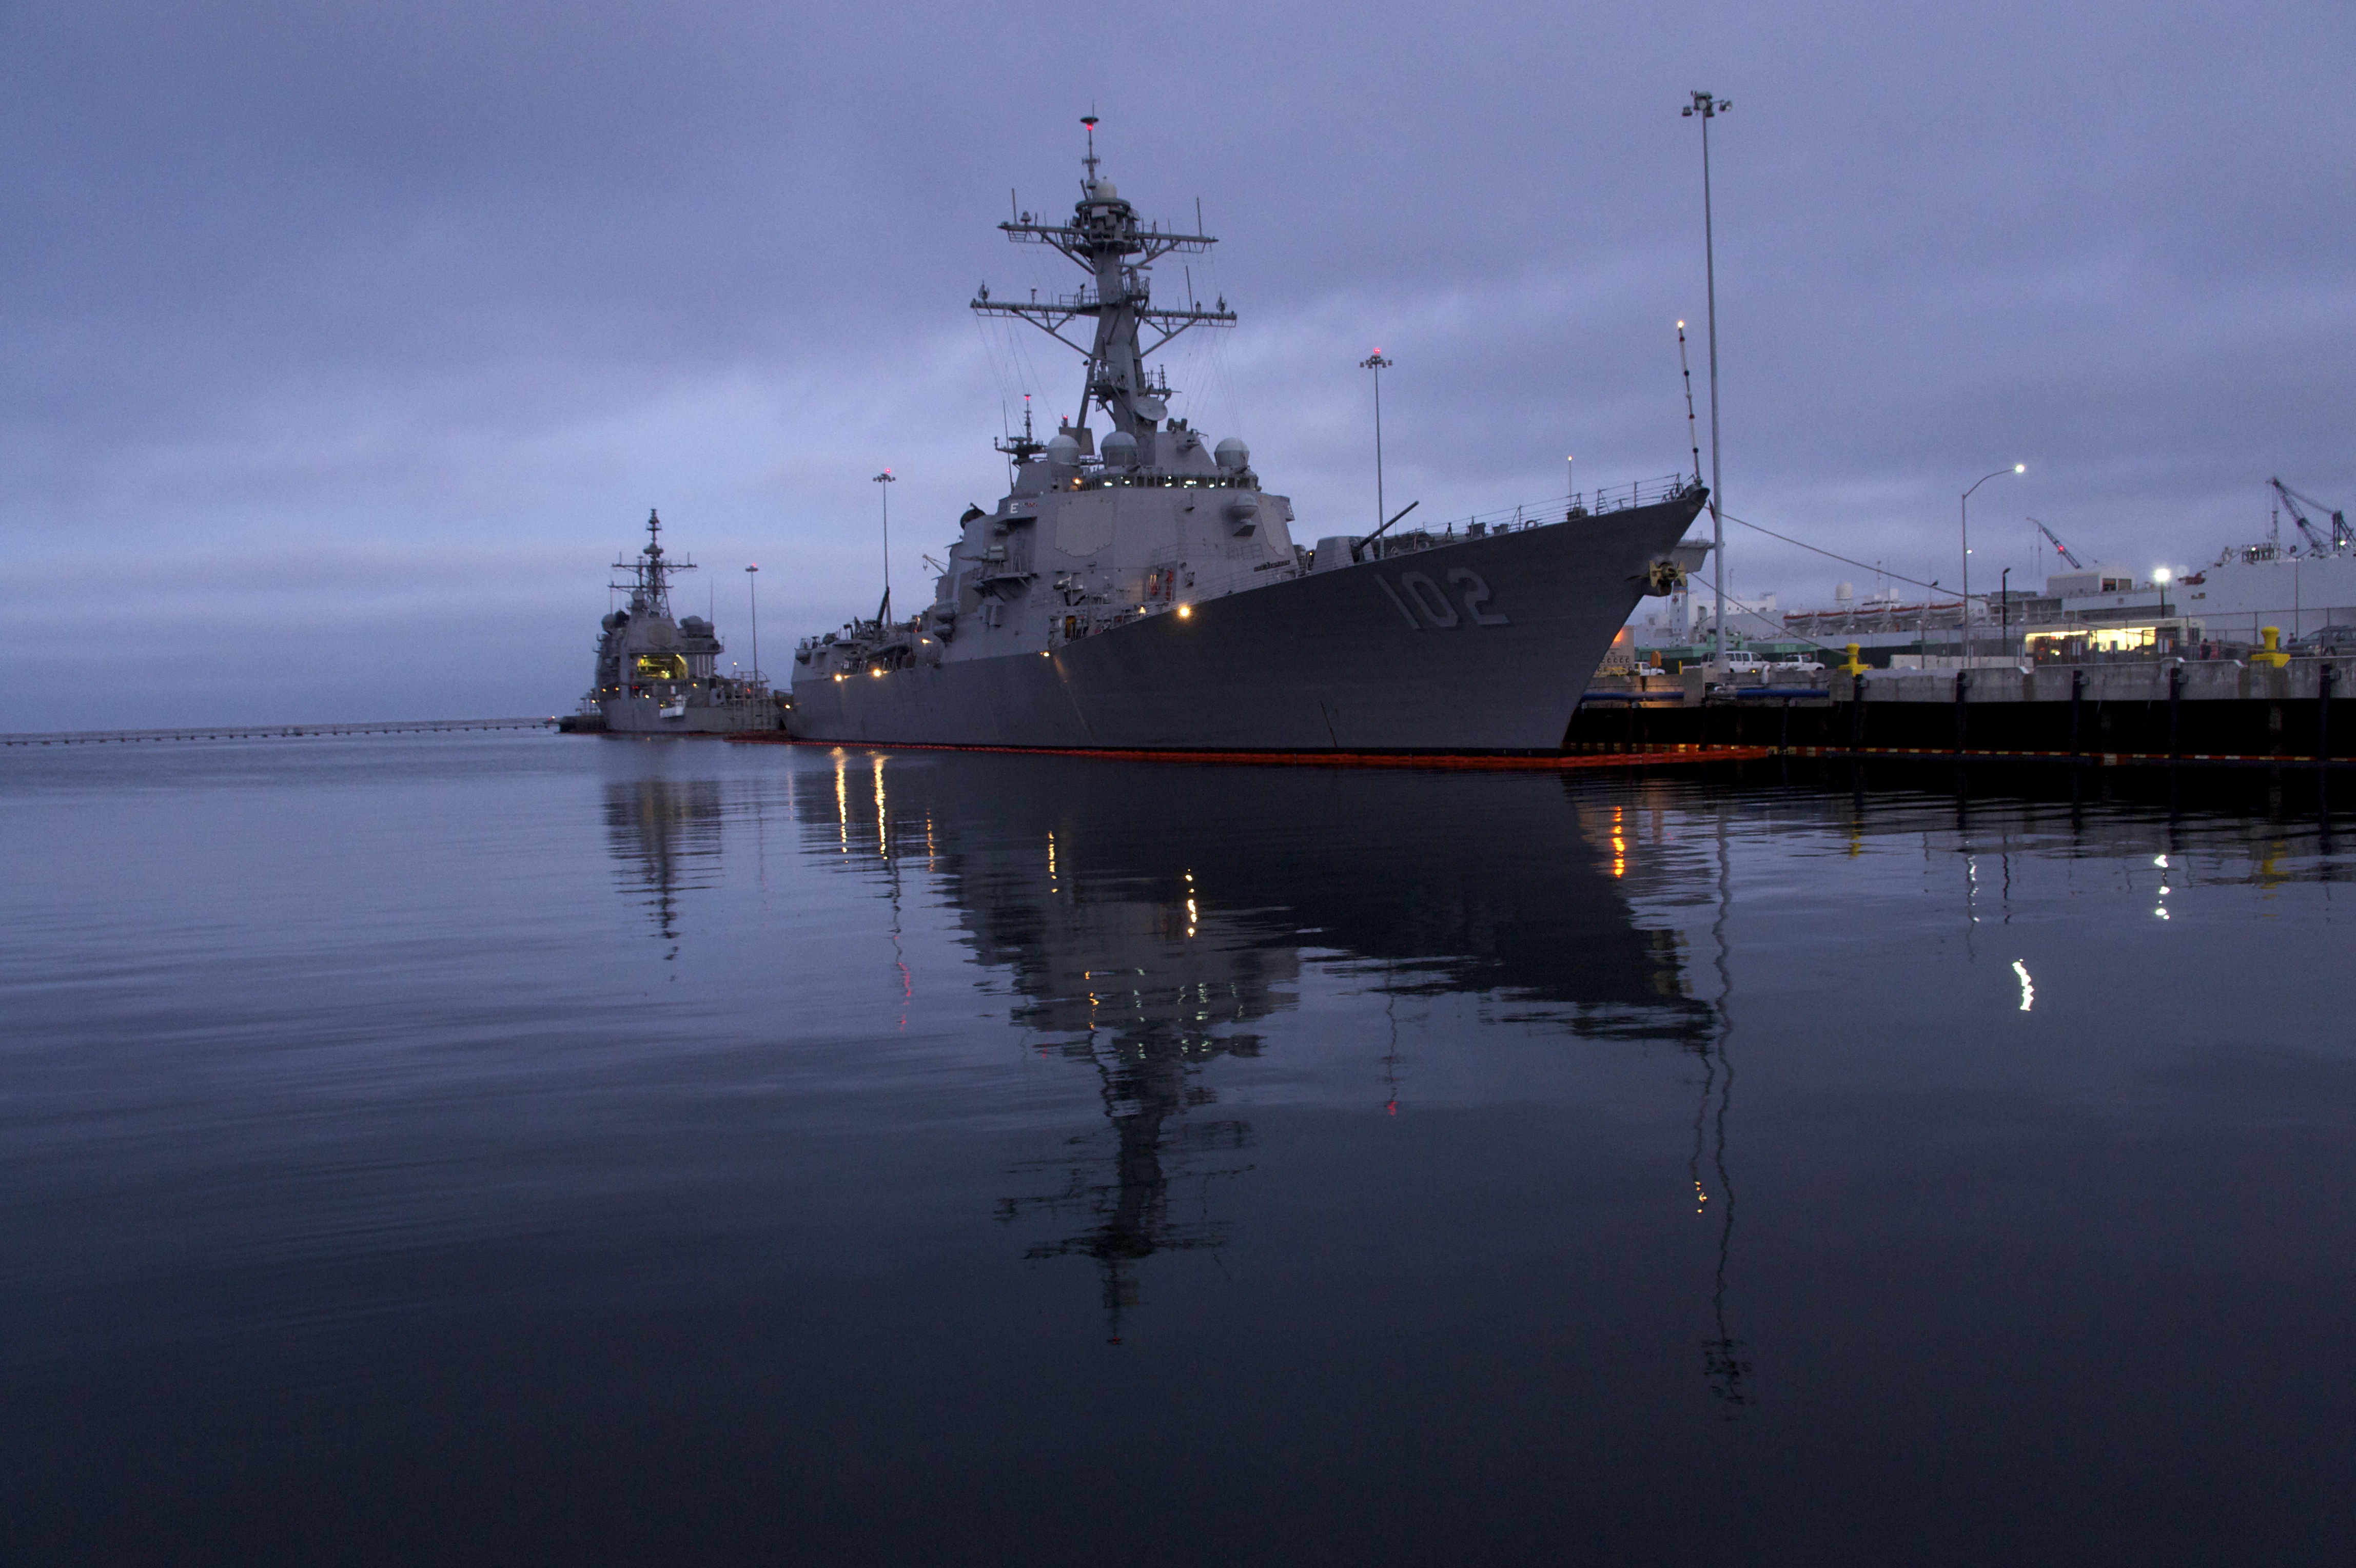 US_Navy_110719-N-ZC343-841_The_guided-missile_destroyer_USS_Sampson_%28DDG_102%29_is_moored_at_Naval_Base_San_Diego.jpg